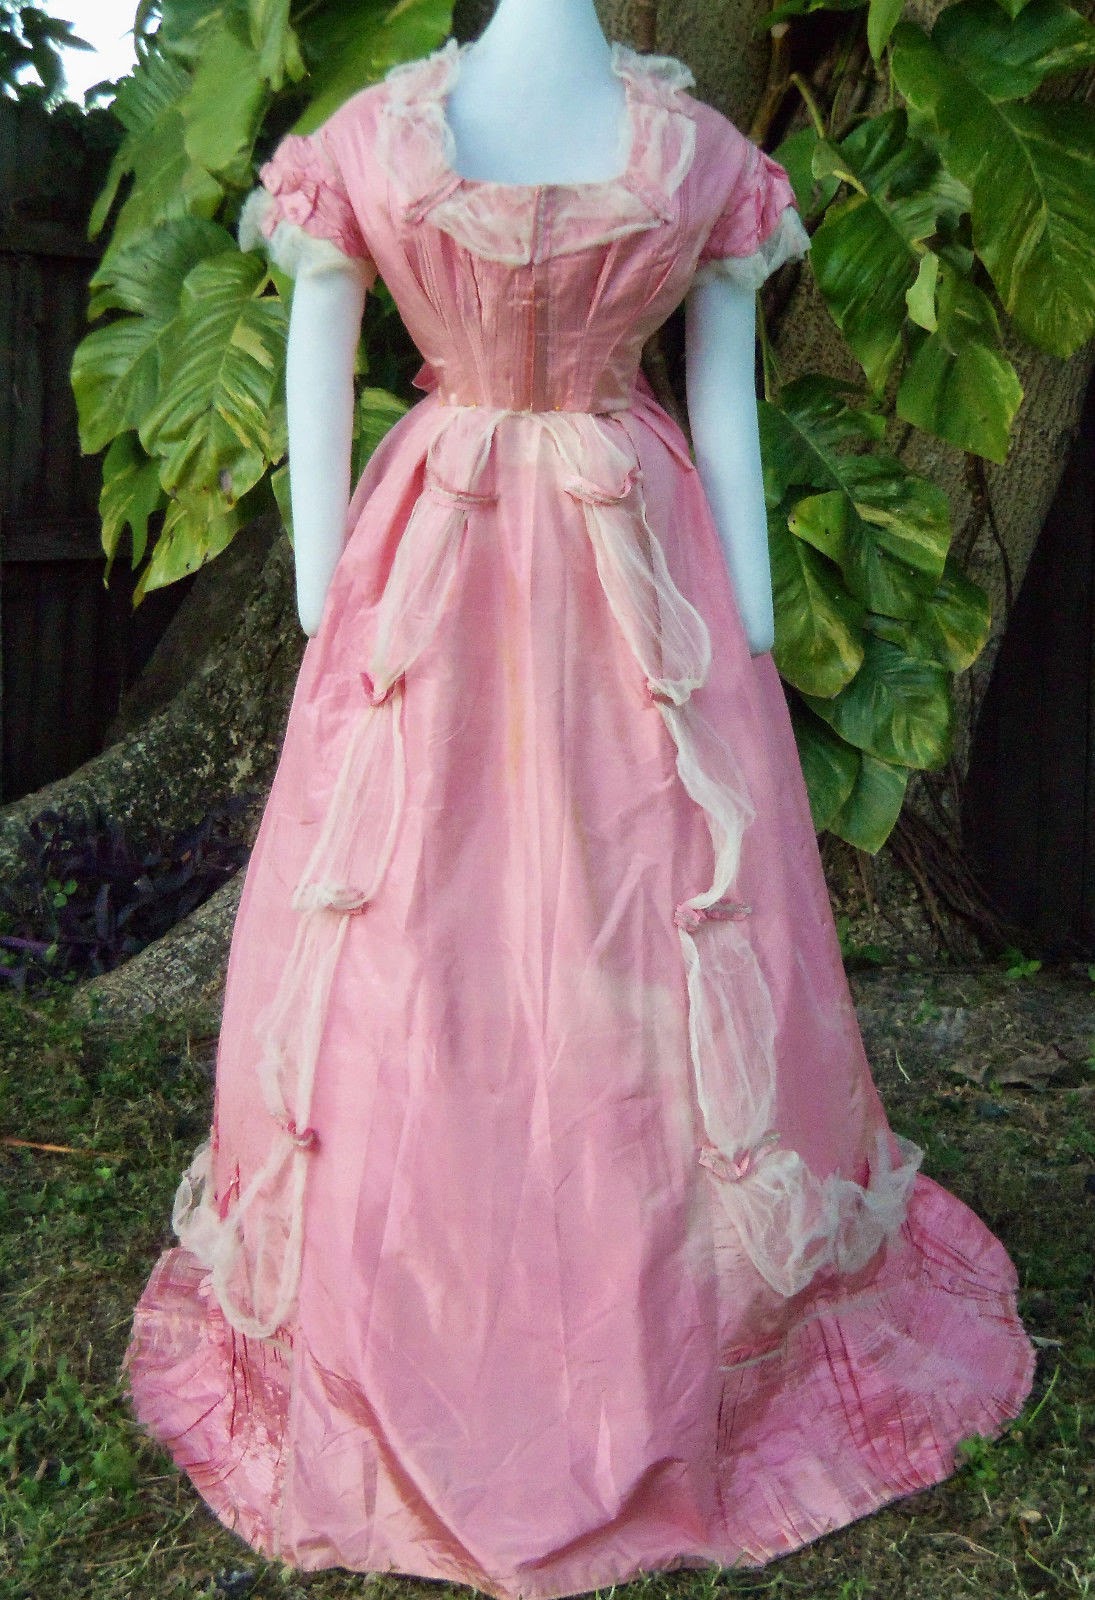 All The Pretty Dresses: Late 1860's Fabulous Pink Gown